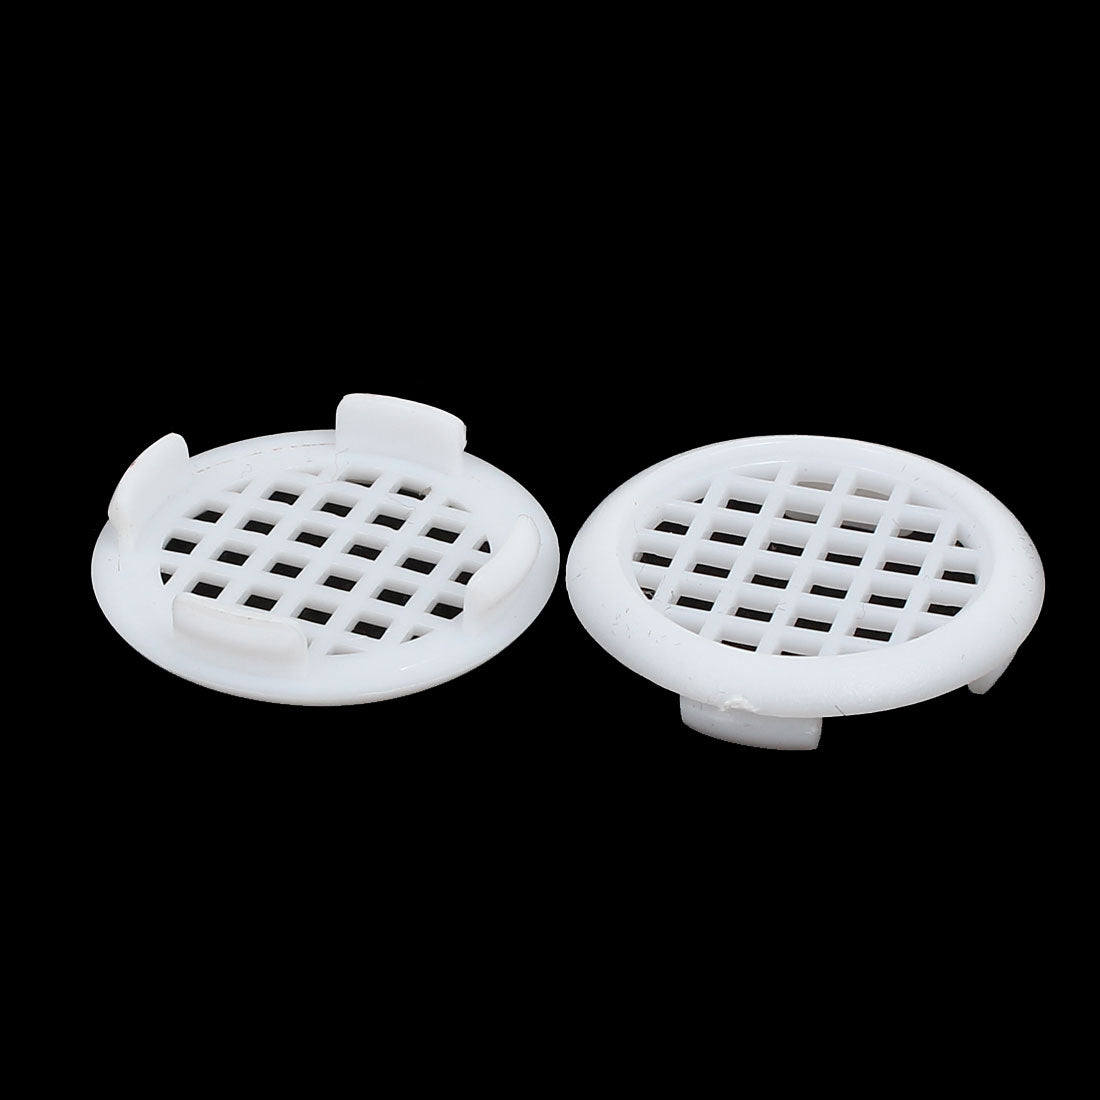 uxcell Uxcell Shoes Cabinet Plastic Square Mesh Hole Air Vent Louver Cover White 31mm Dia 20pcs